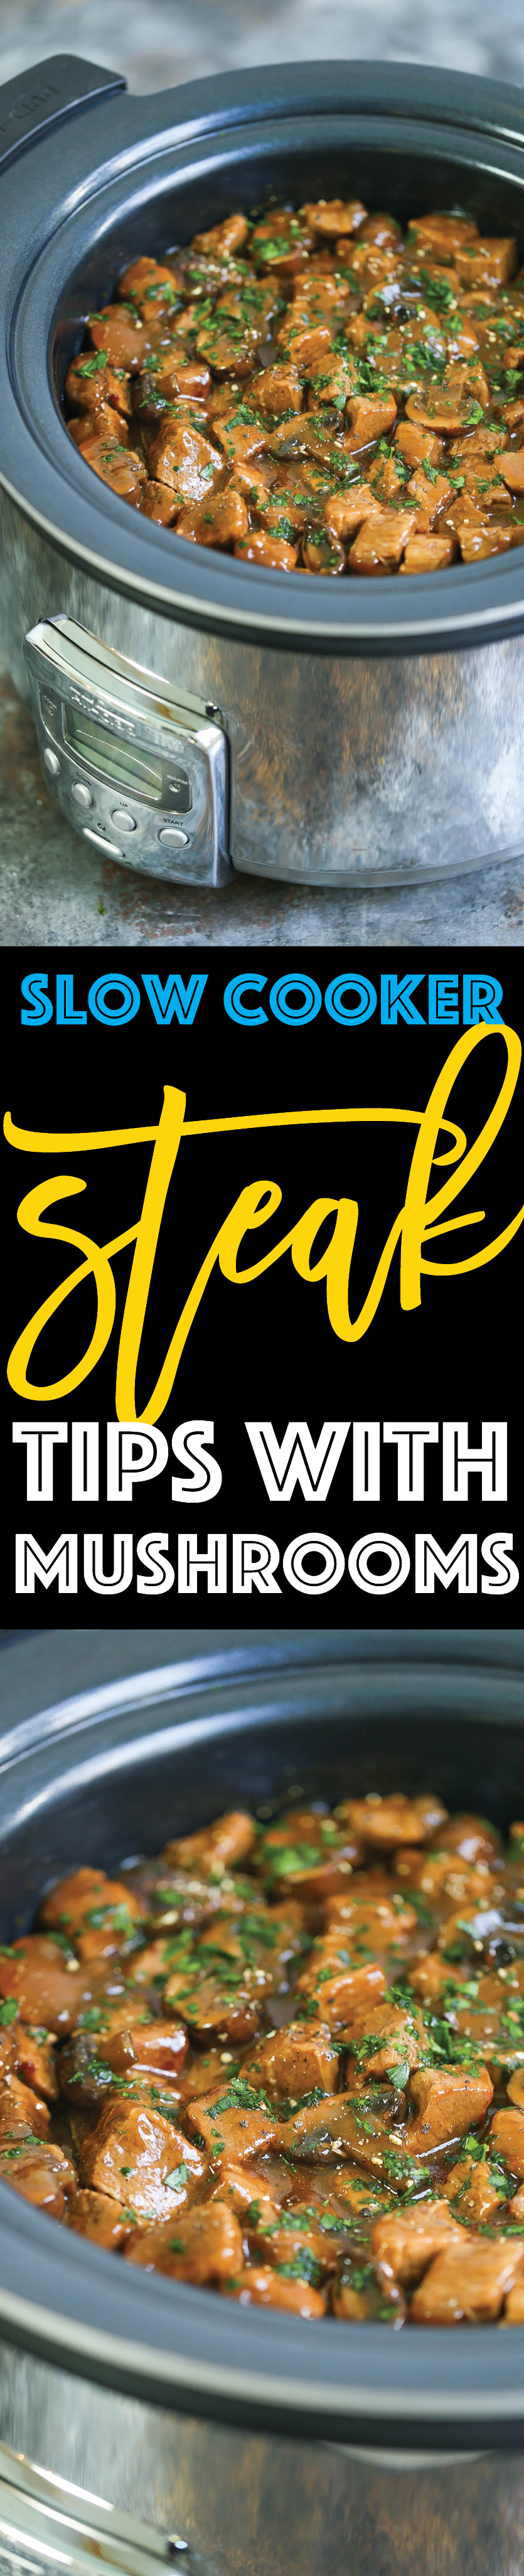 Slow Cooker Steak Tips with Mushrooms - Dump everything into your crockpot and let it cook low and slow for the most tender, gravy soaked steak bites ever!